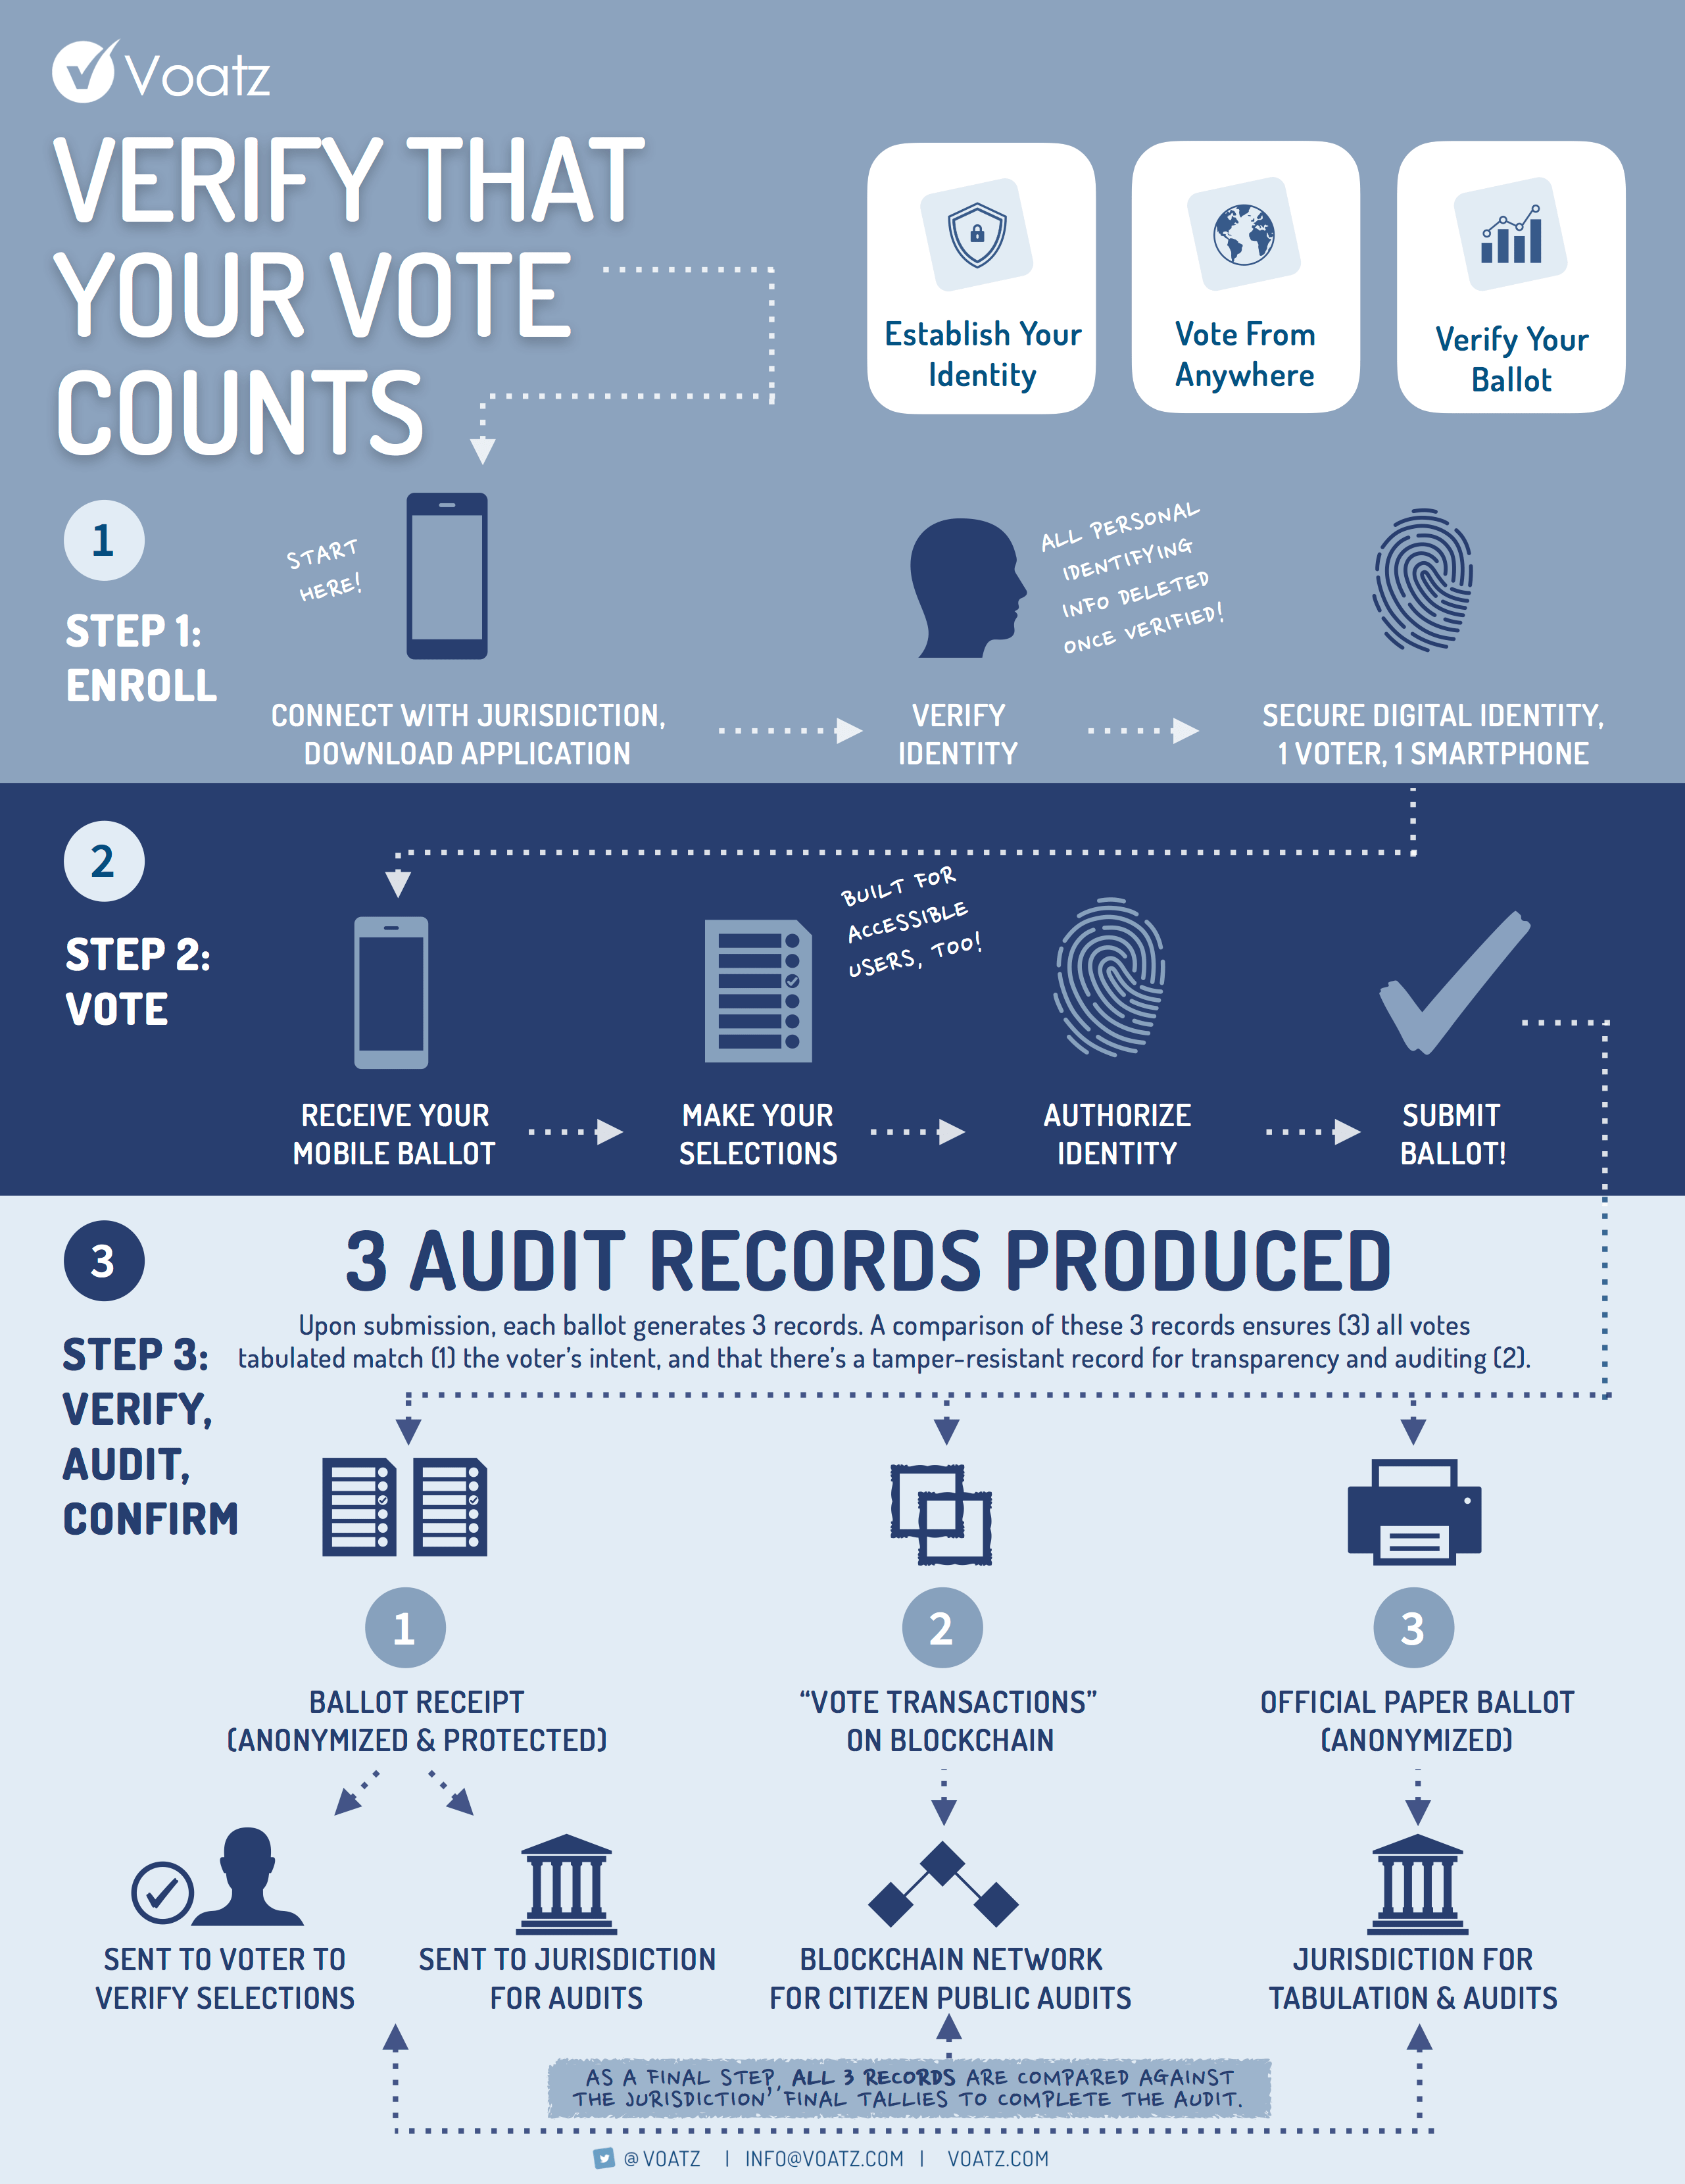 Mobile voting is safe and trusted.